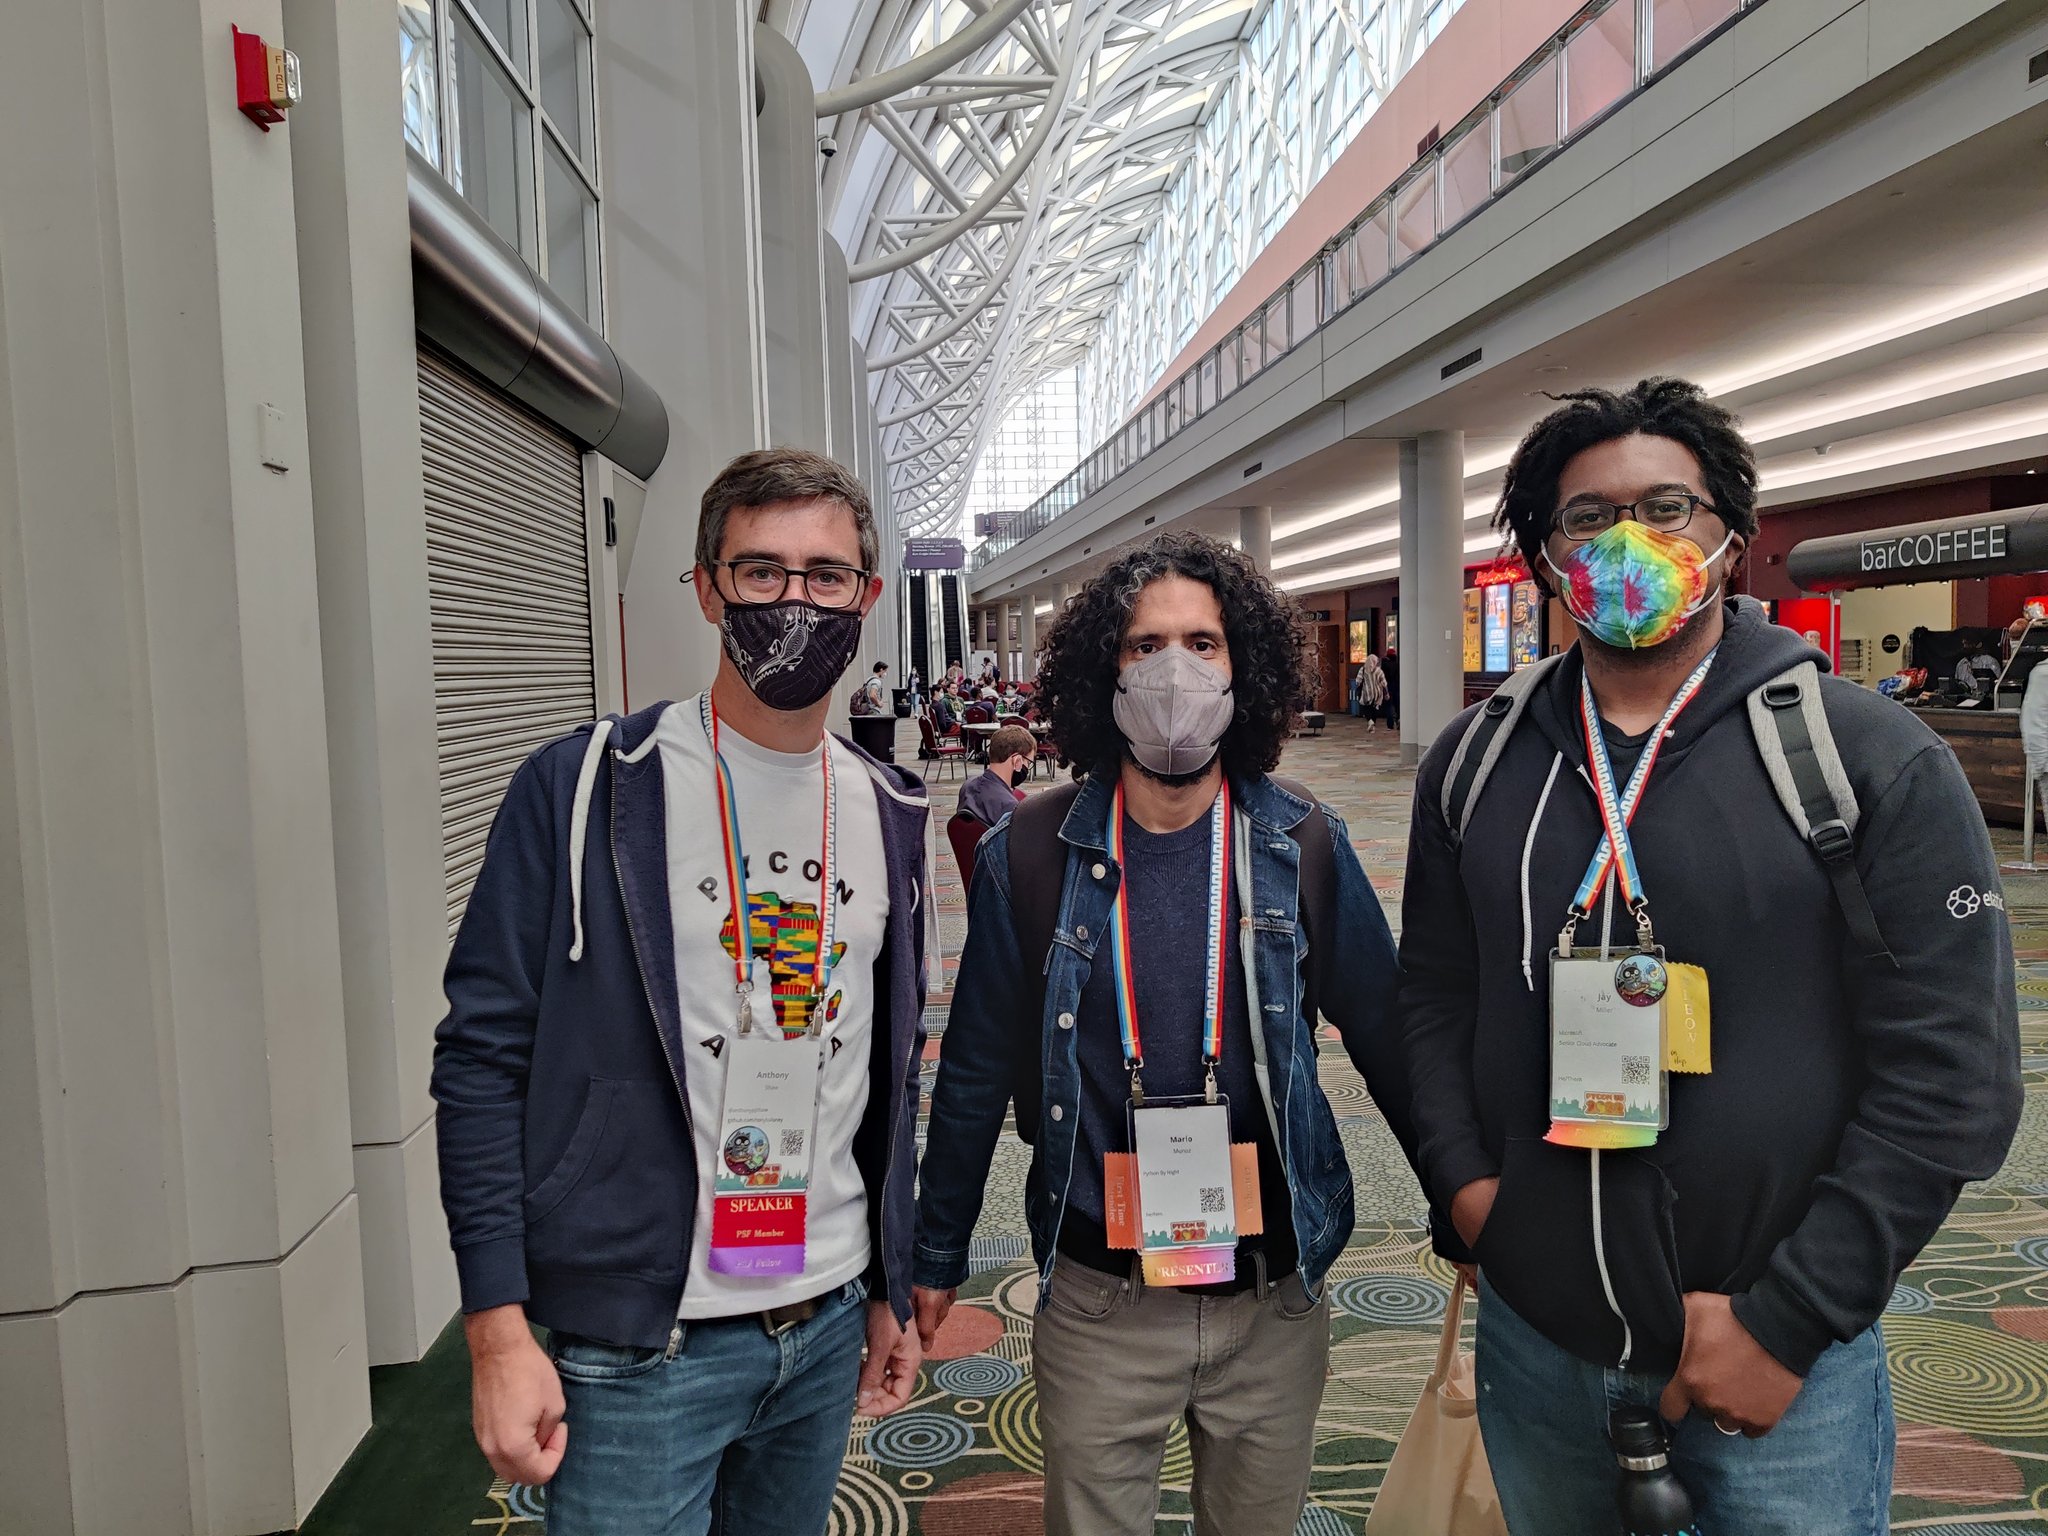 Mario, Myself, and Anthony Shaw at Pycon 2022